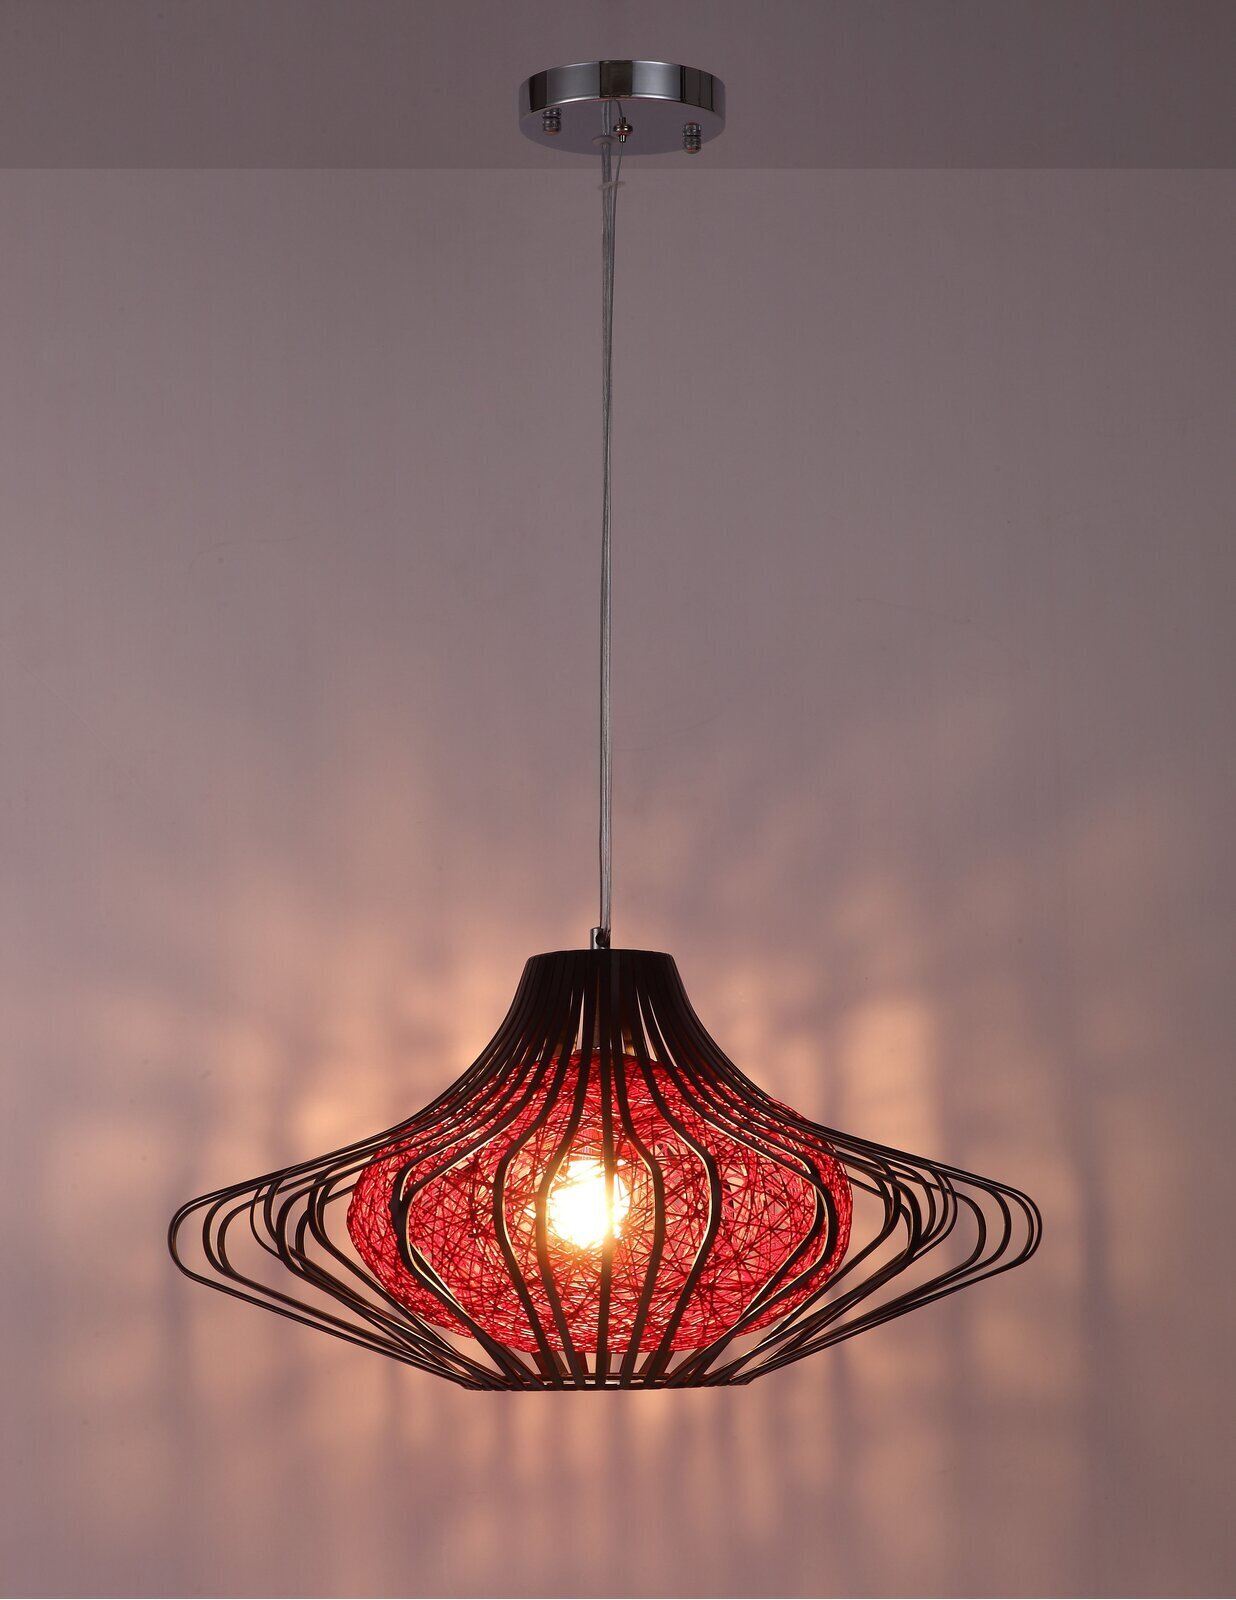 Chinese Hanging Lamp with Metal Exterior